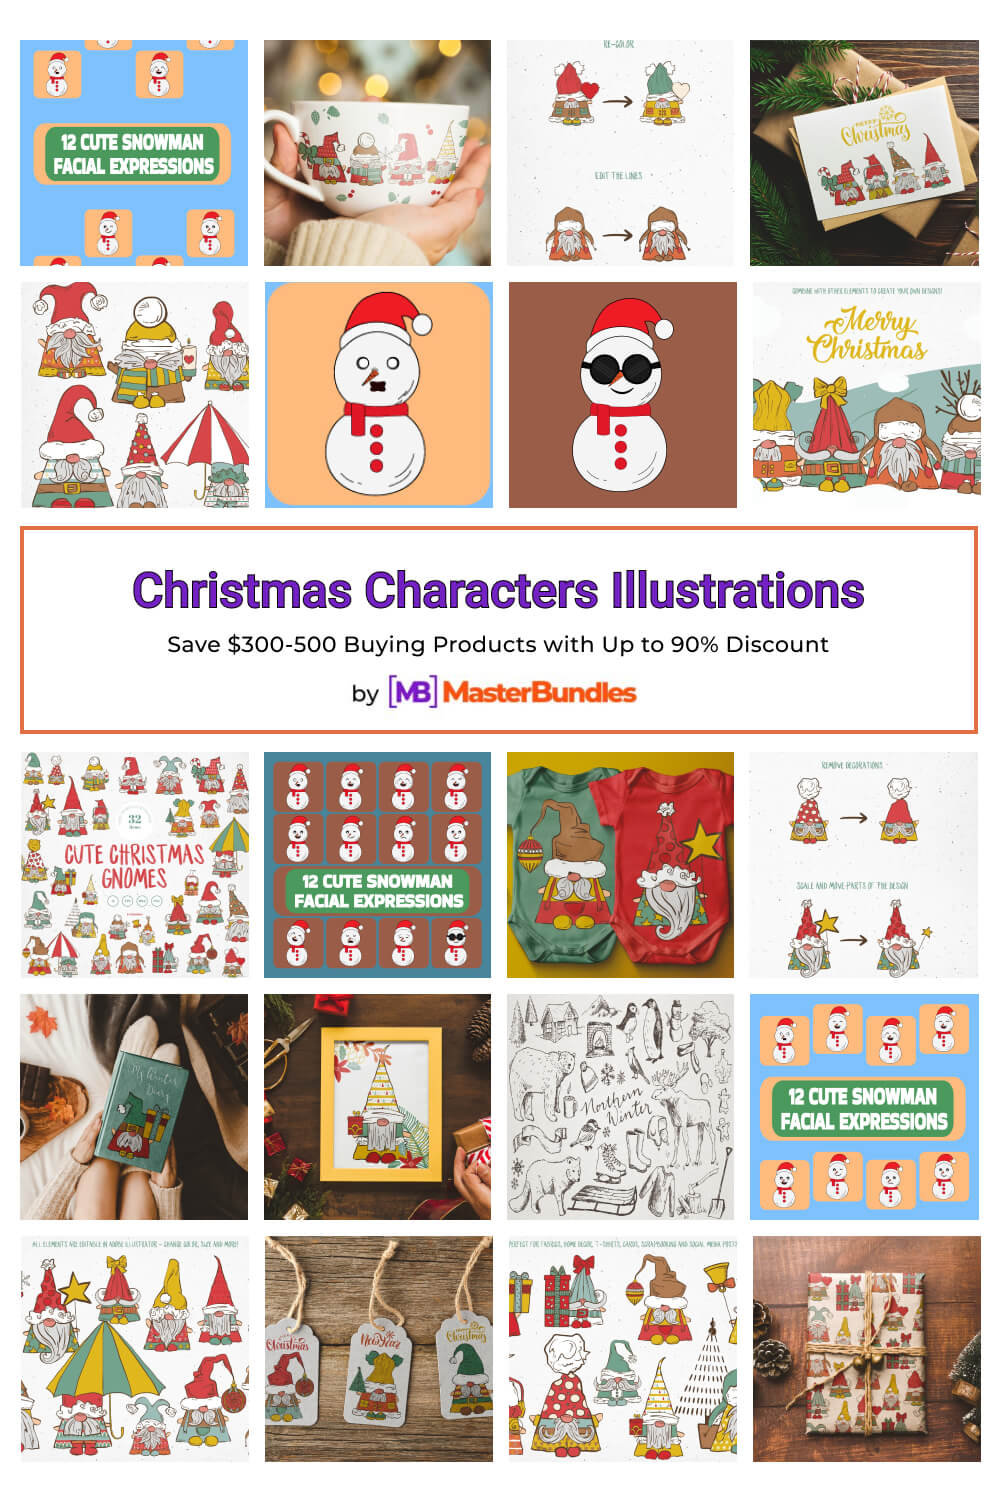 christmas characters illustrations pinterest image.